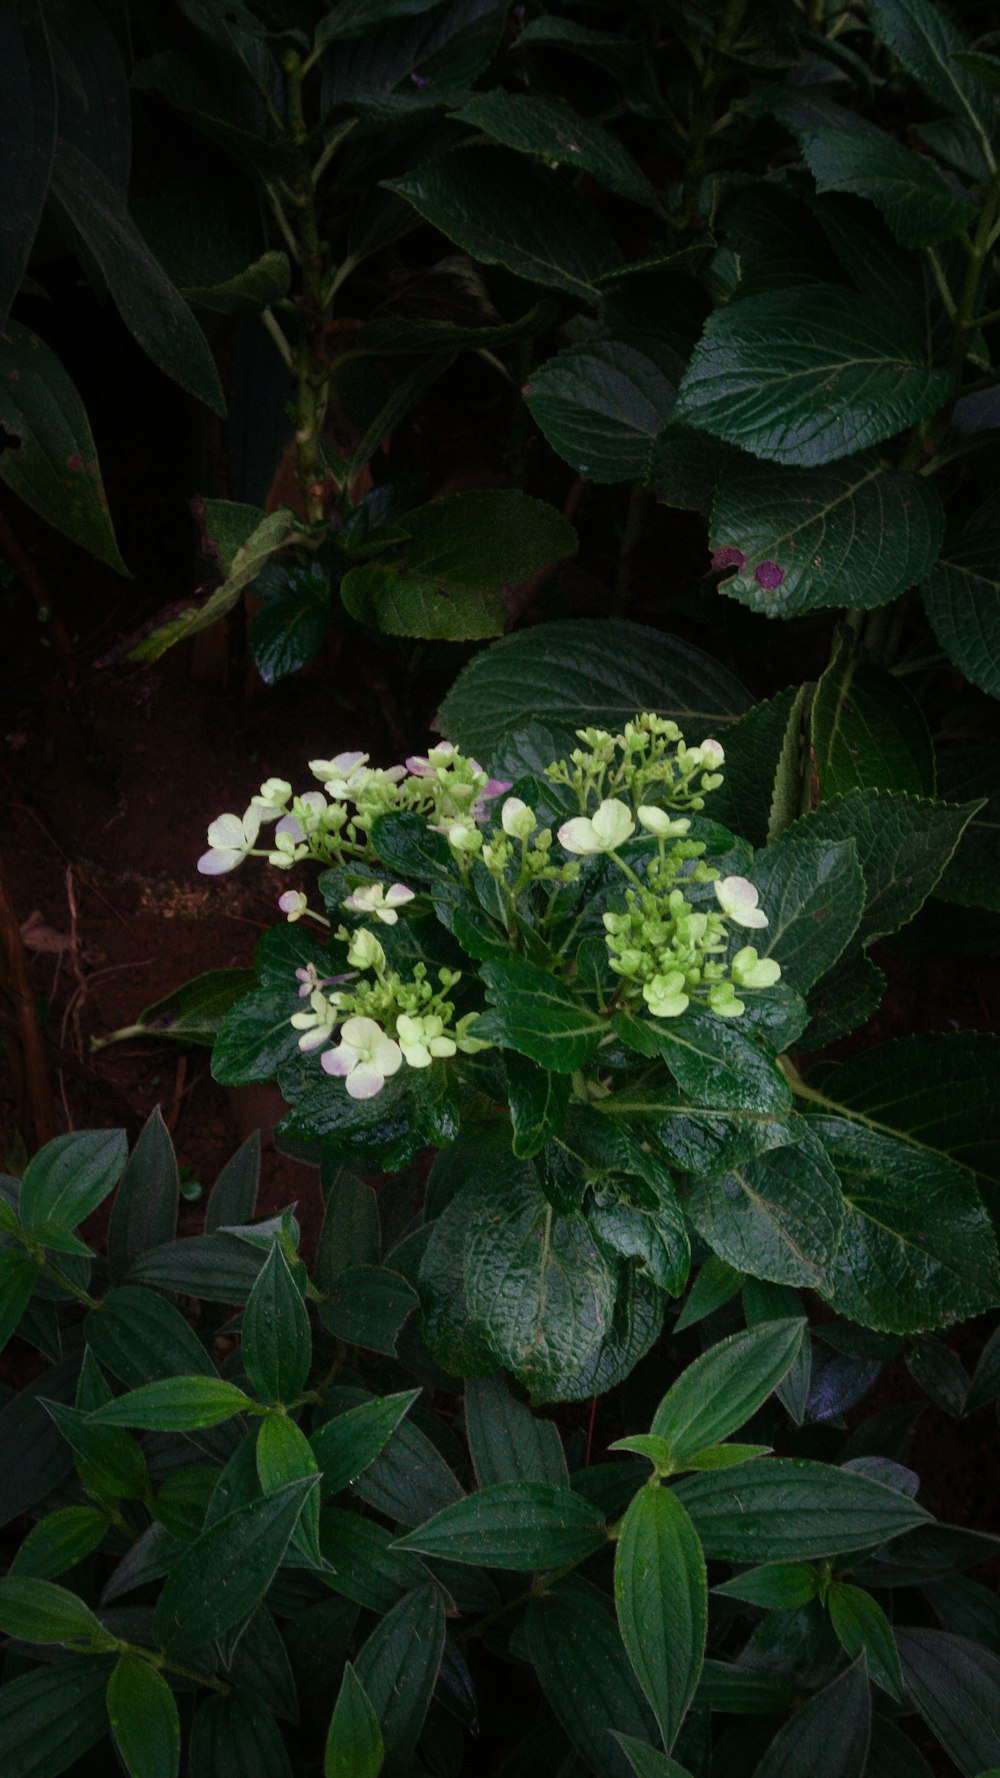 a bush of green leaves with white flowers